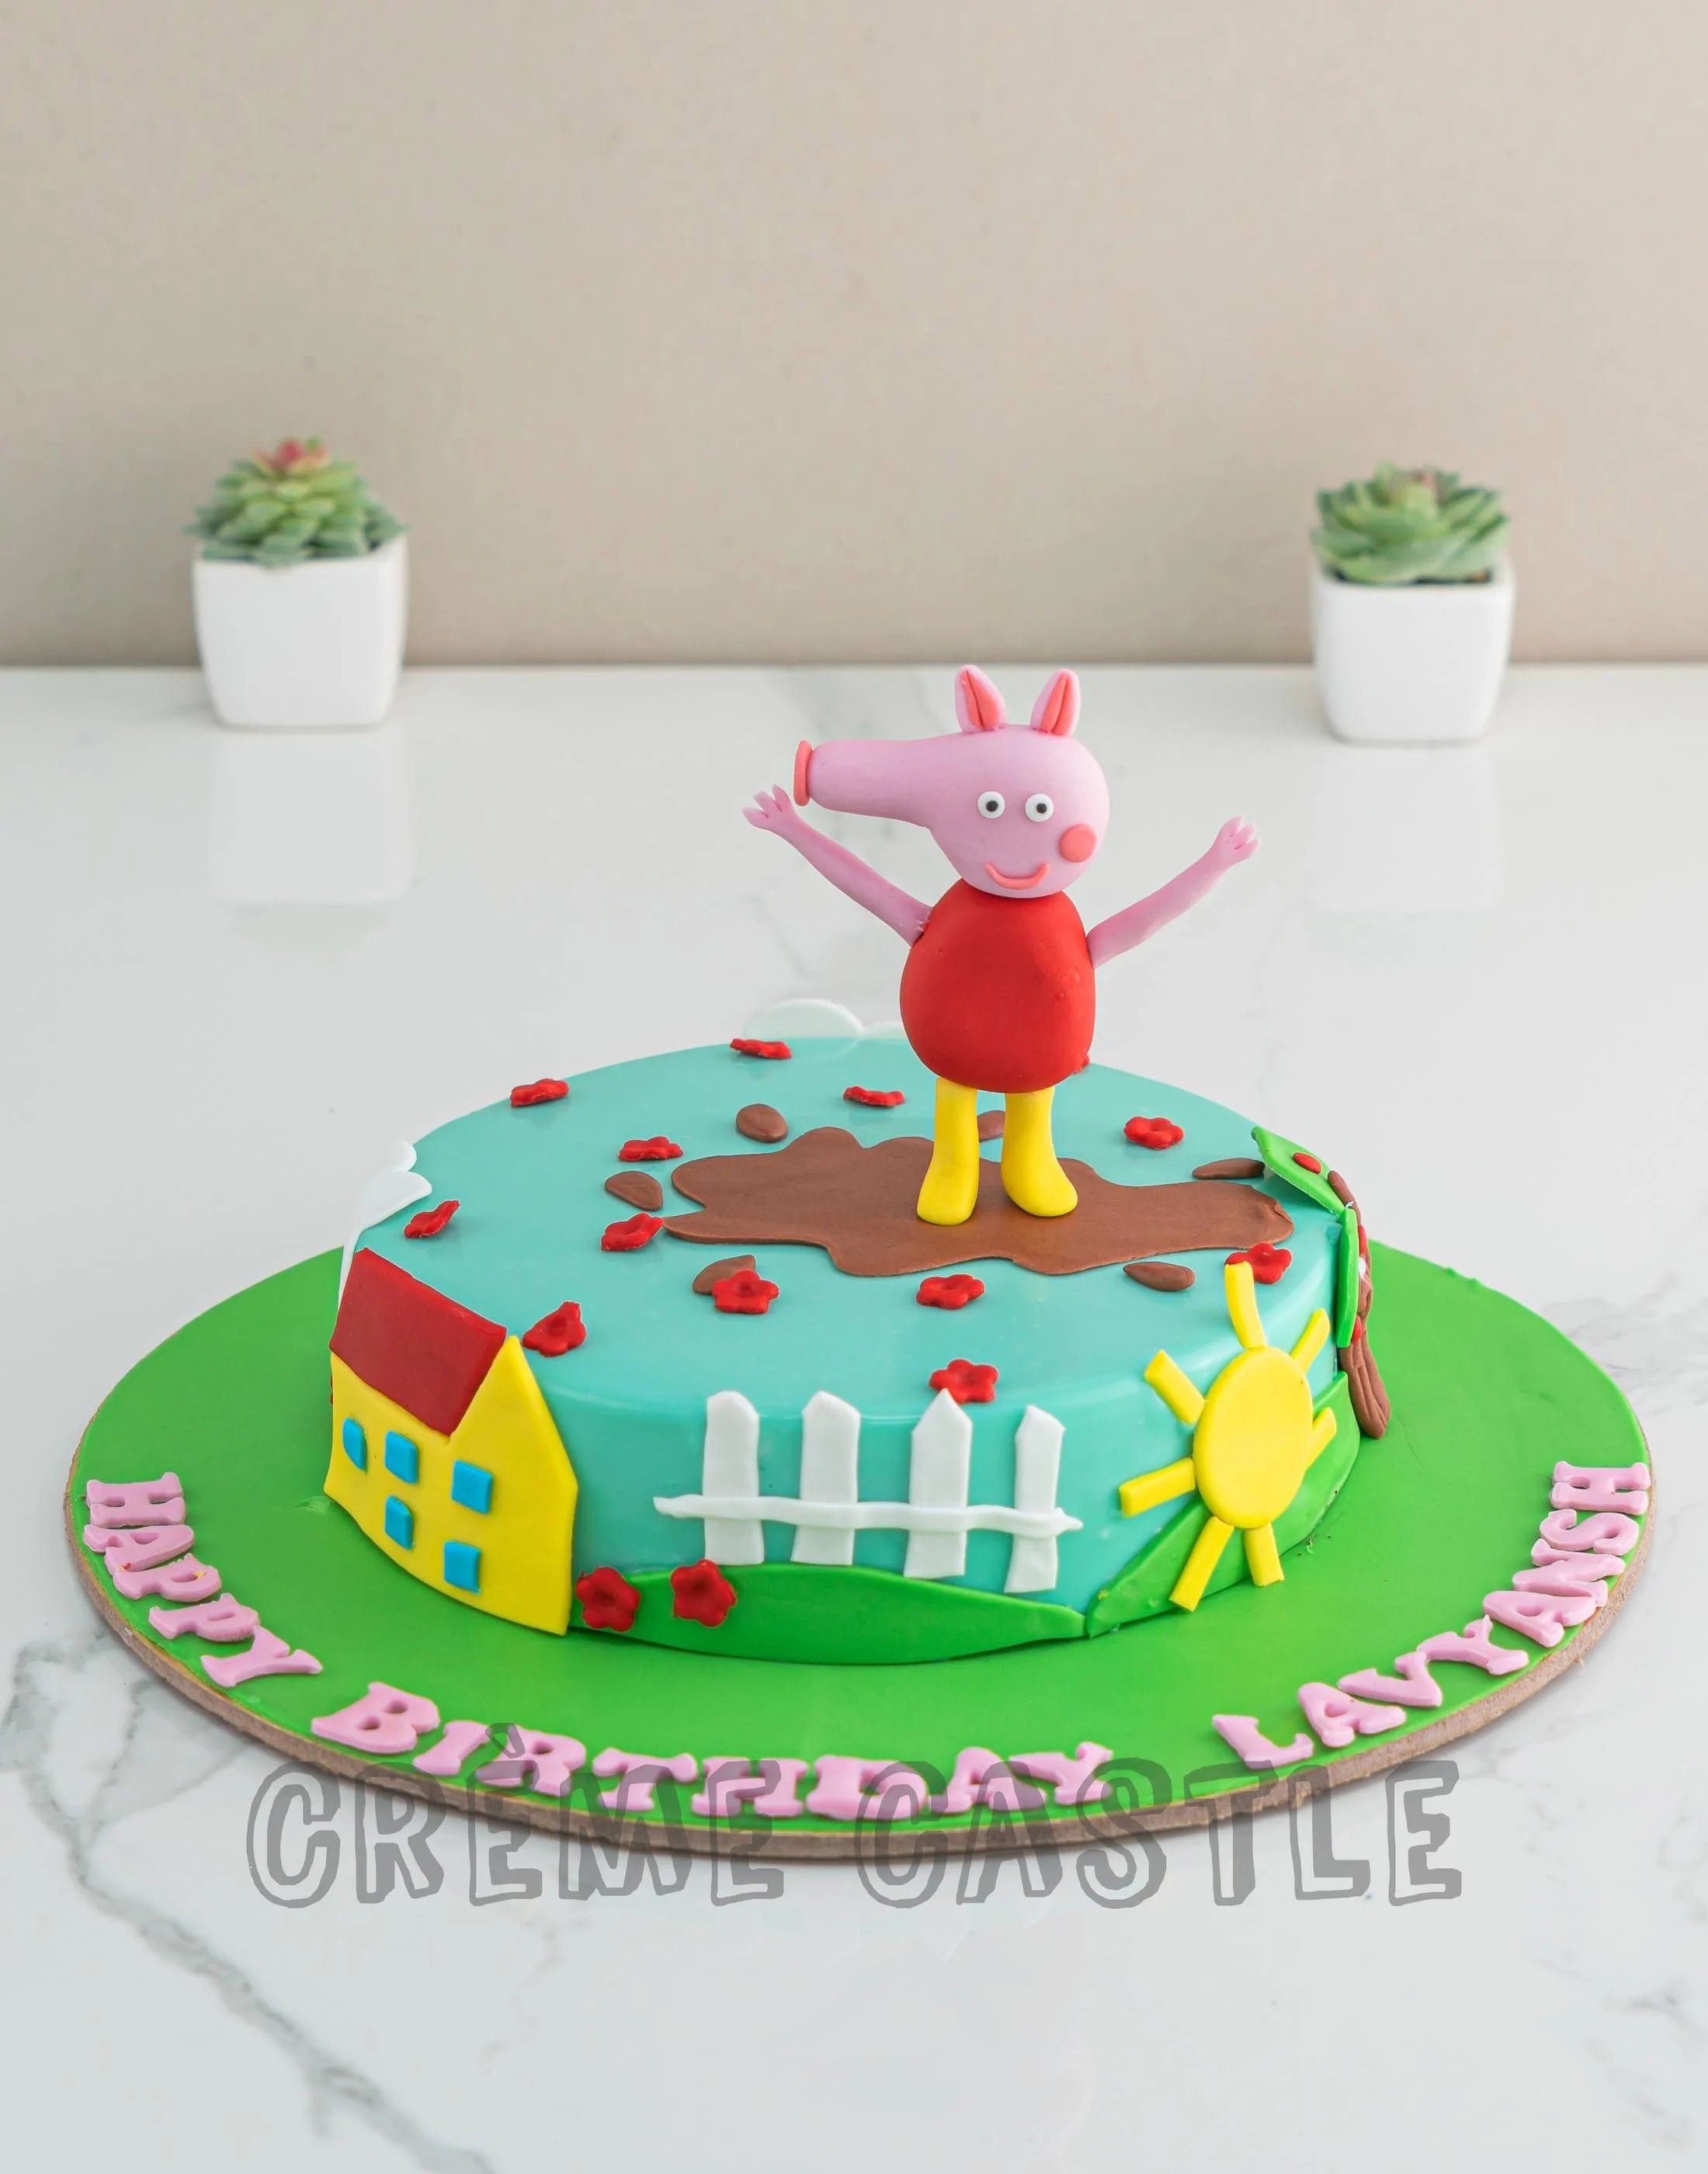 Cool Ideas for Making Cakes for a Barnyard Theme Party